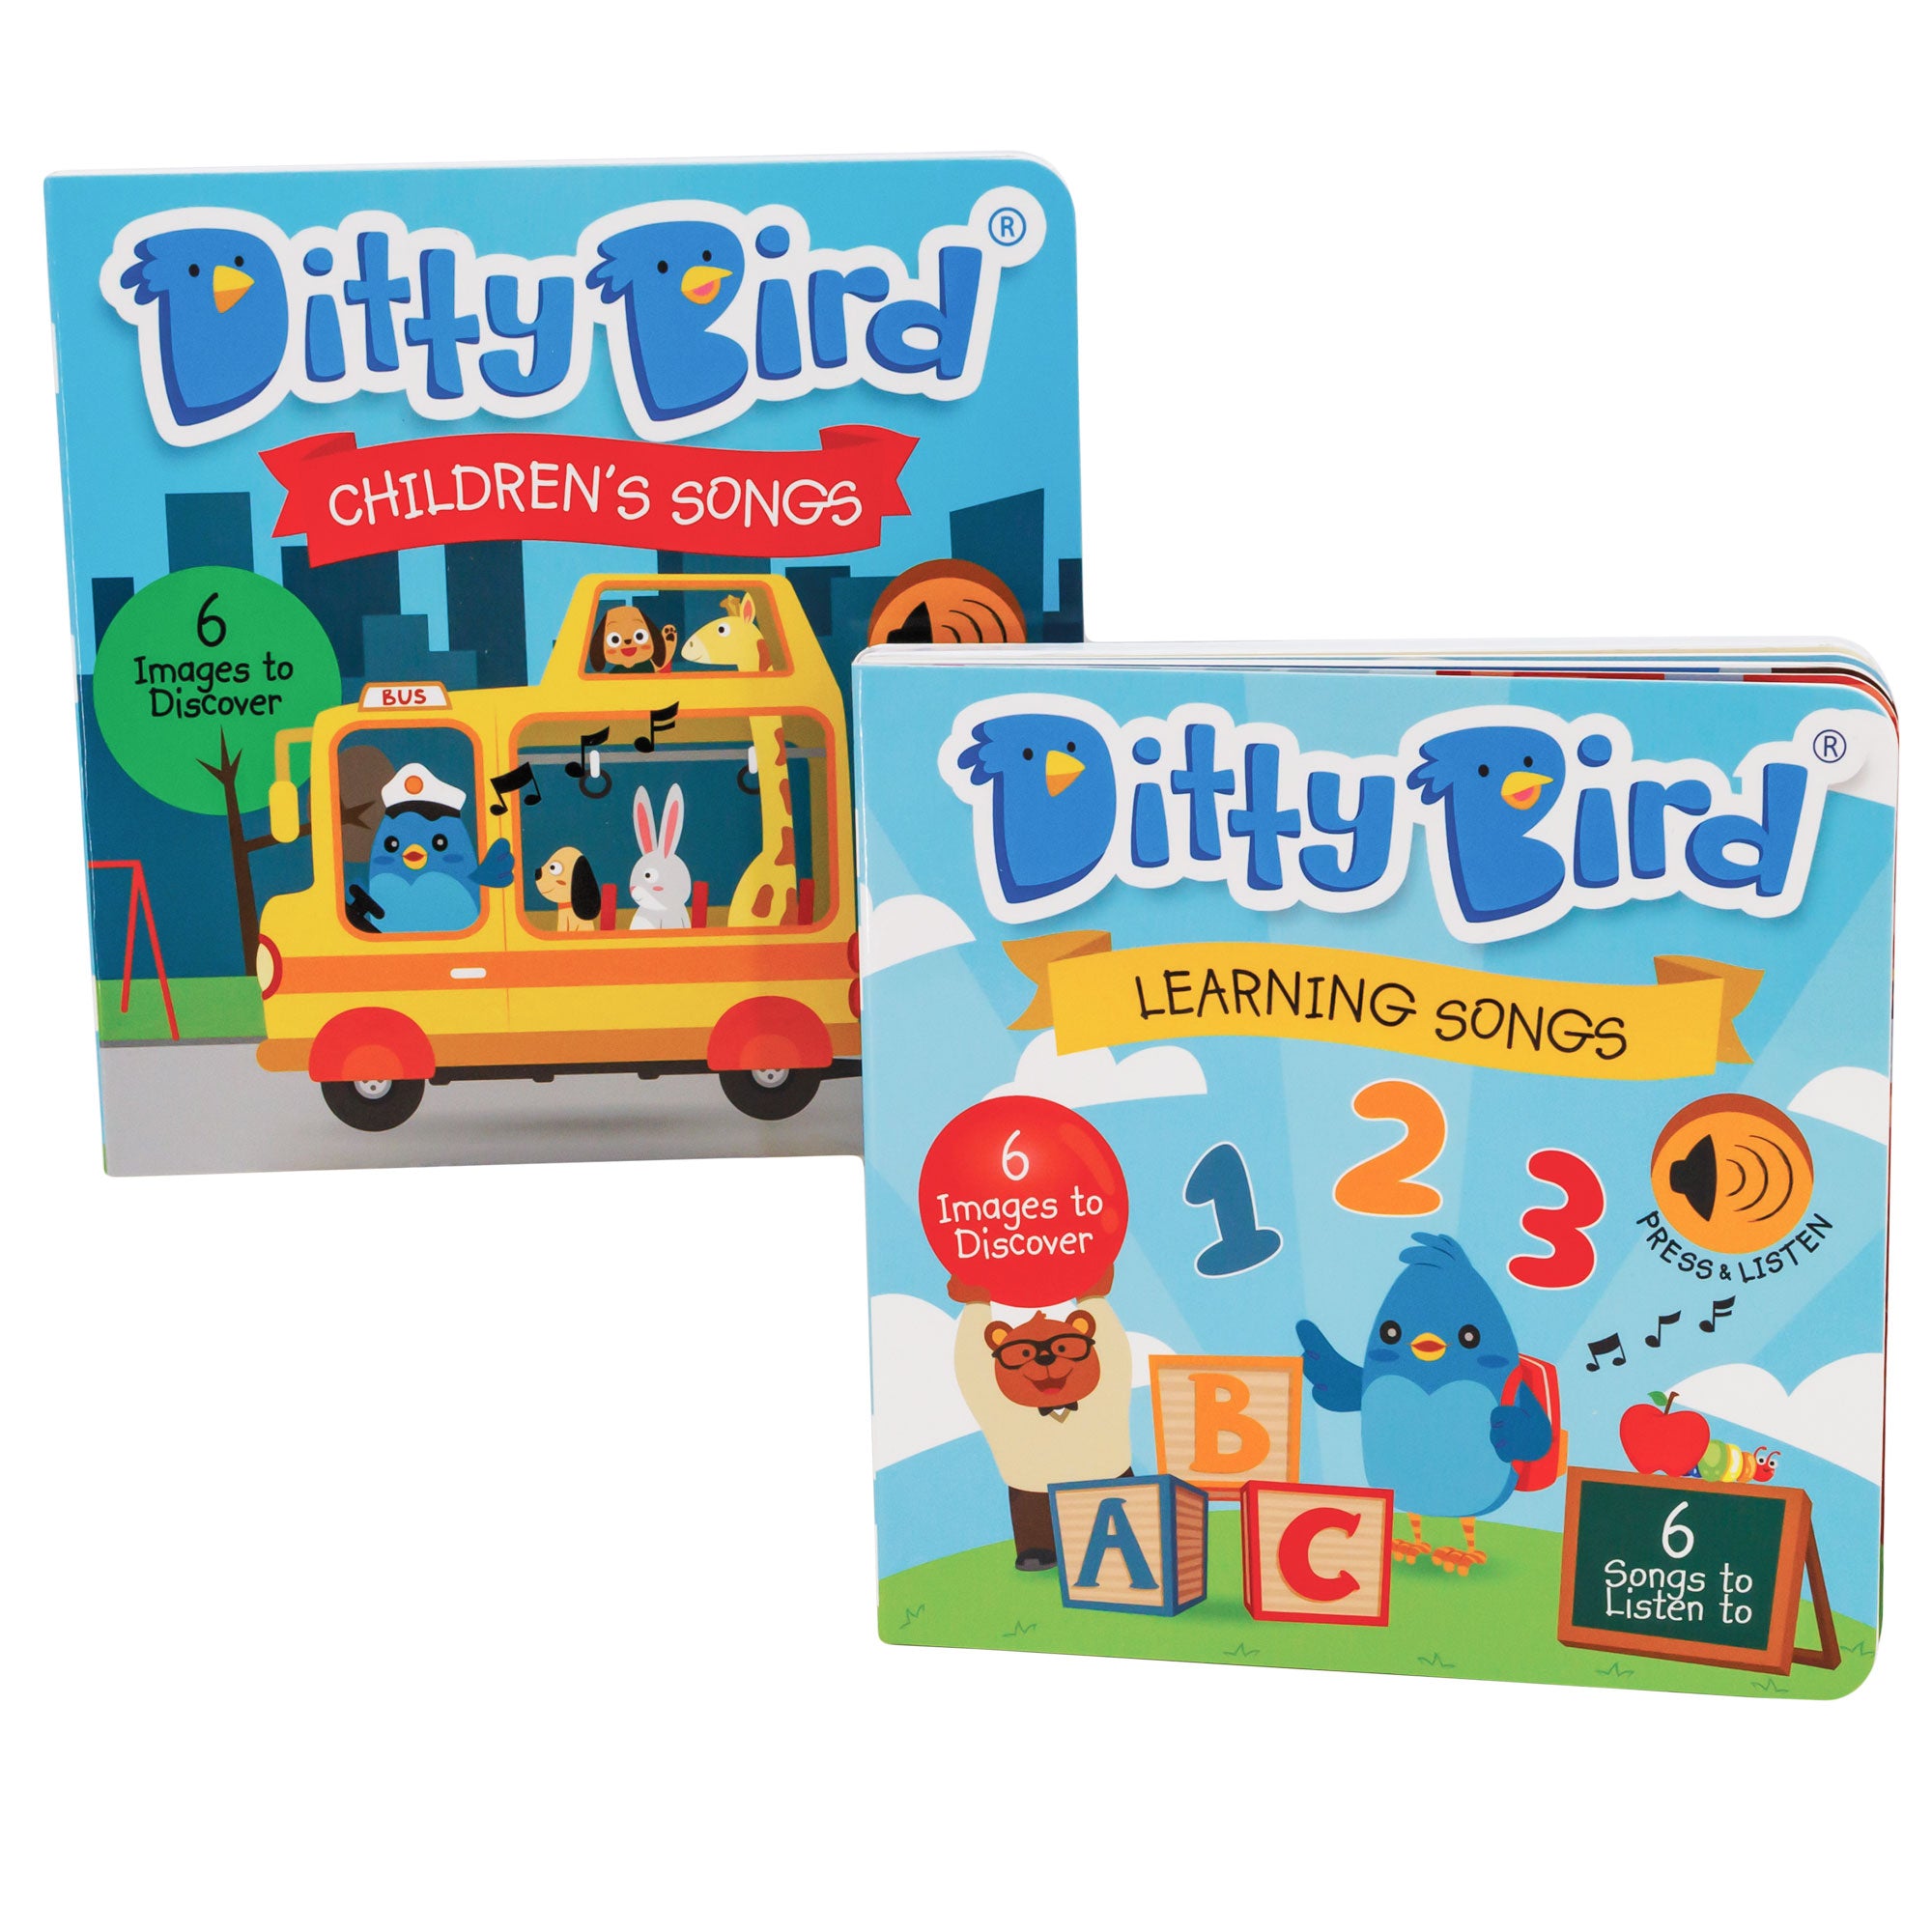 Ditty Bird 2 book set. Left book is "Children's Songs" with a blue city background and a yellow bus with a variety of animals as passengers and a blue bird driver. On the right is "Learning Songs" with a blue sky and cloud background and a blue bird with a backpack, a bear with glasses and a nice outfit, and 3 blocks with A B C on them. Books have a "press & listen" icon on them showing the book has sound buttons inside.